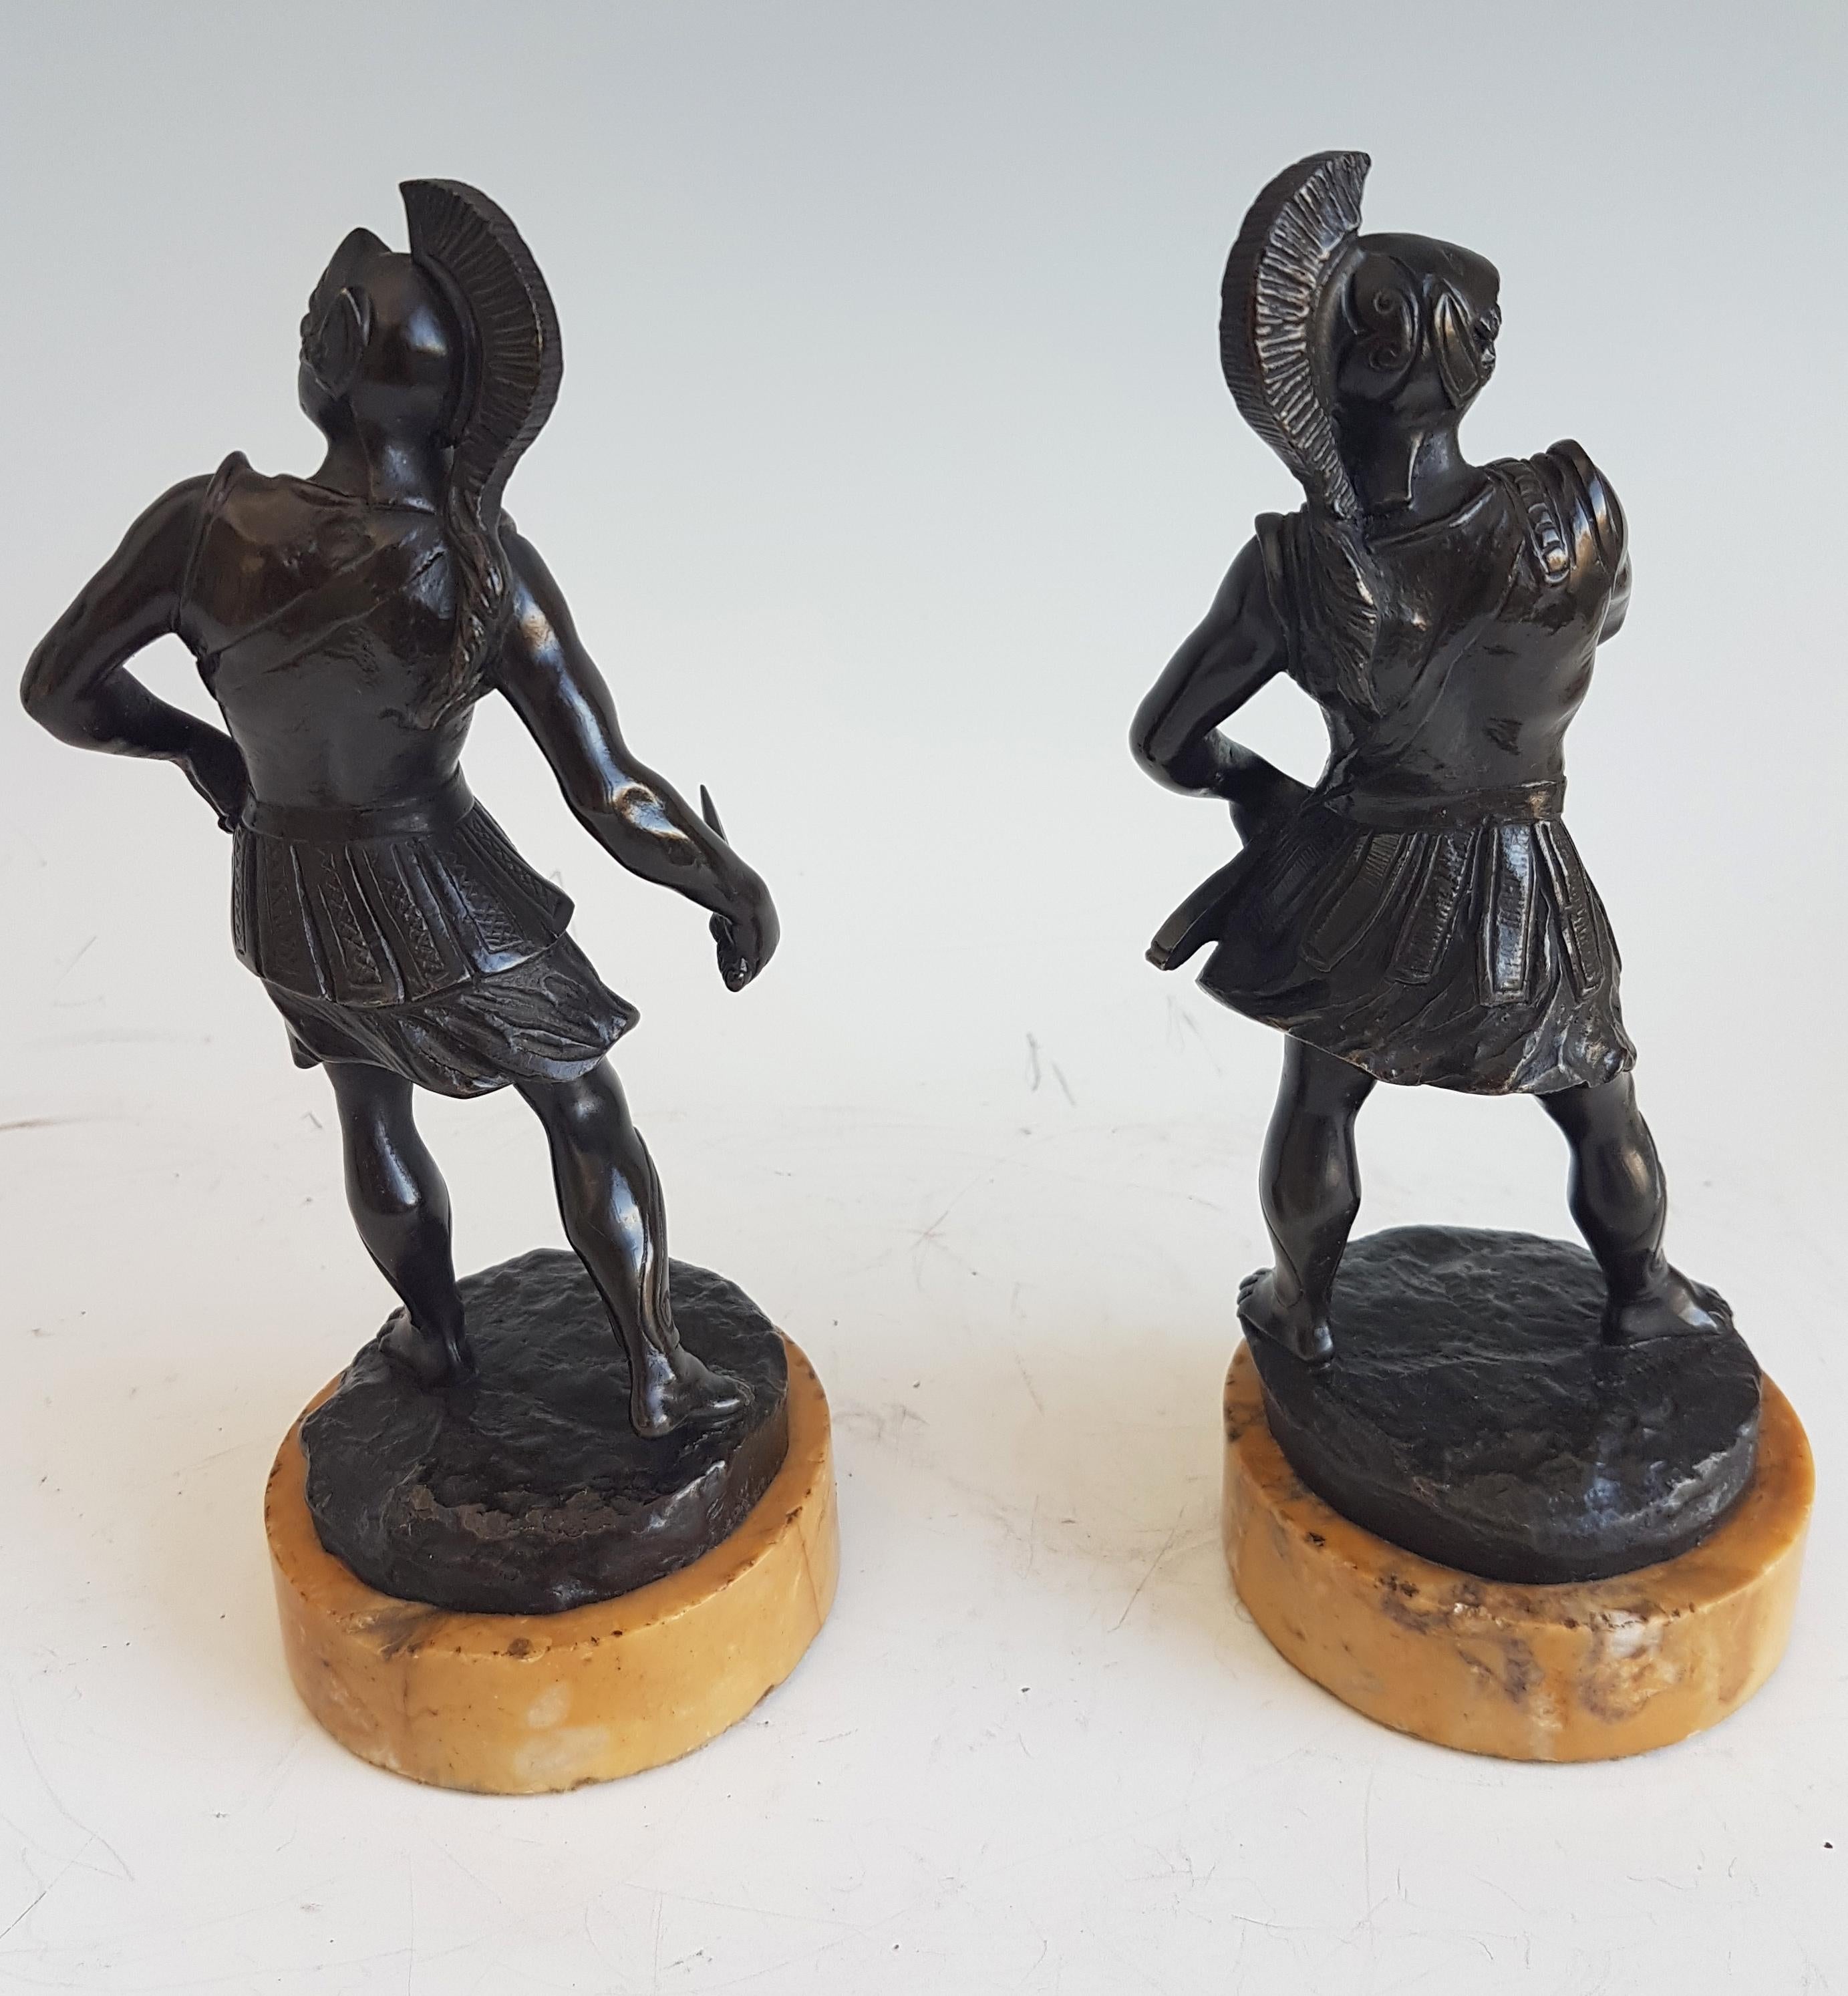 A fine pair of Italian grand tour patinated bronze gladiators. One with his dagger drawn, the other about to draw his. Both in plumed helmets. Superb original patination and detail. Set on fine sienna marble bases.